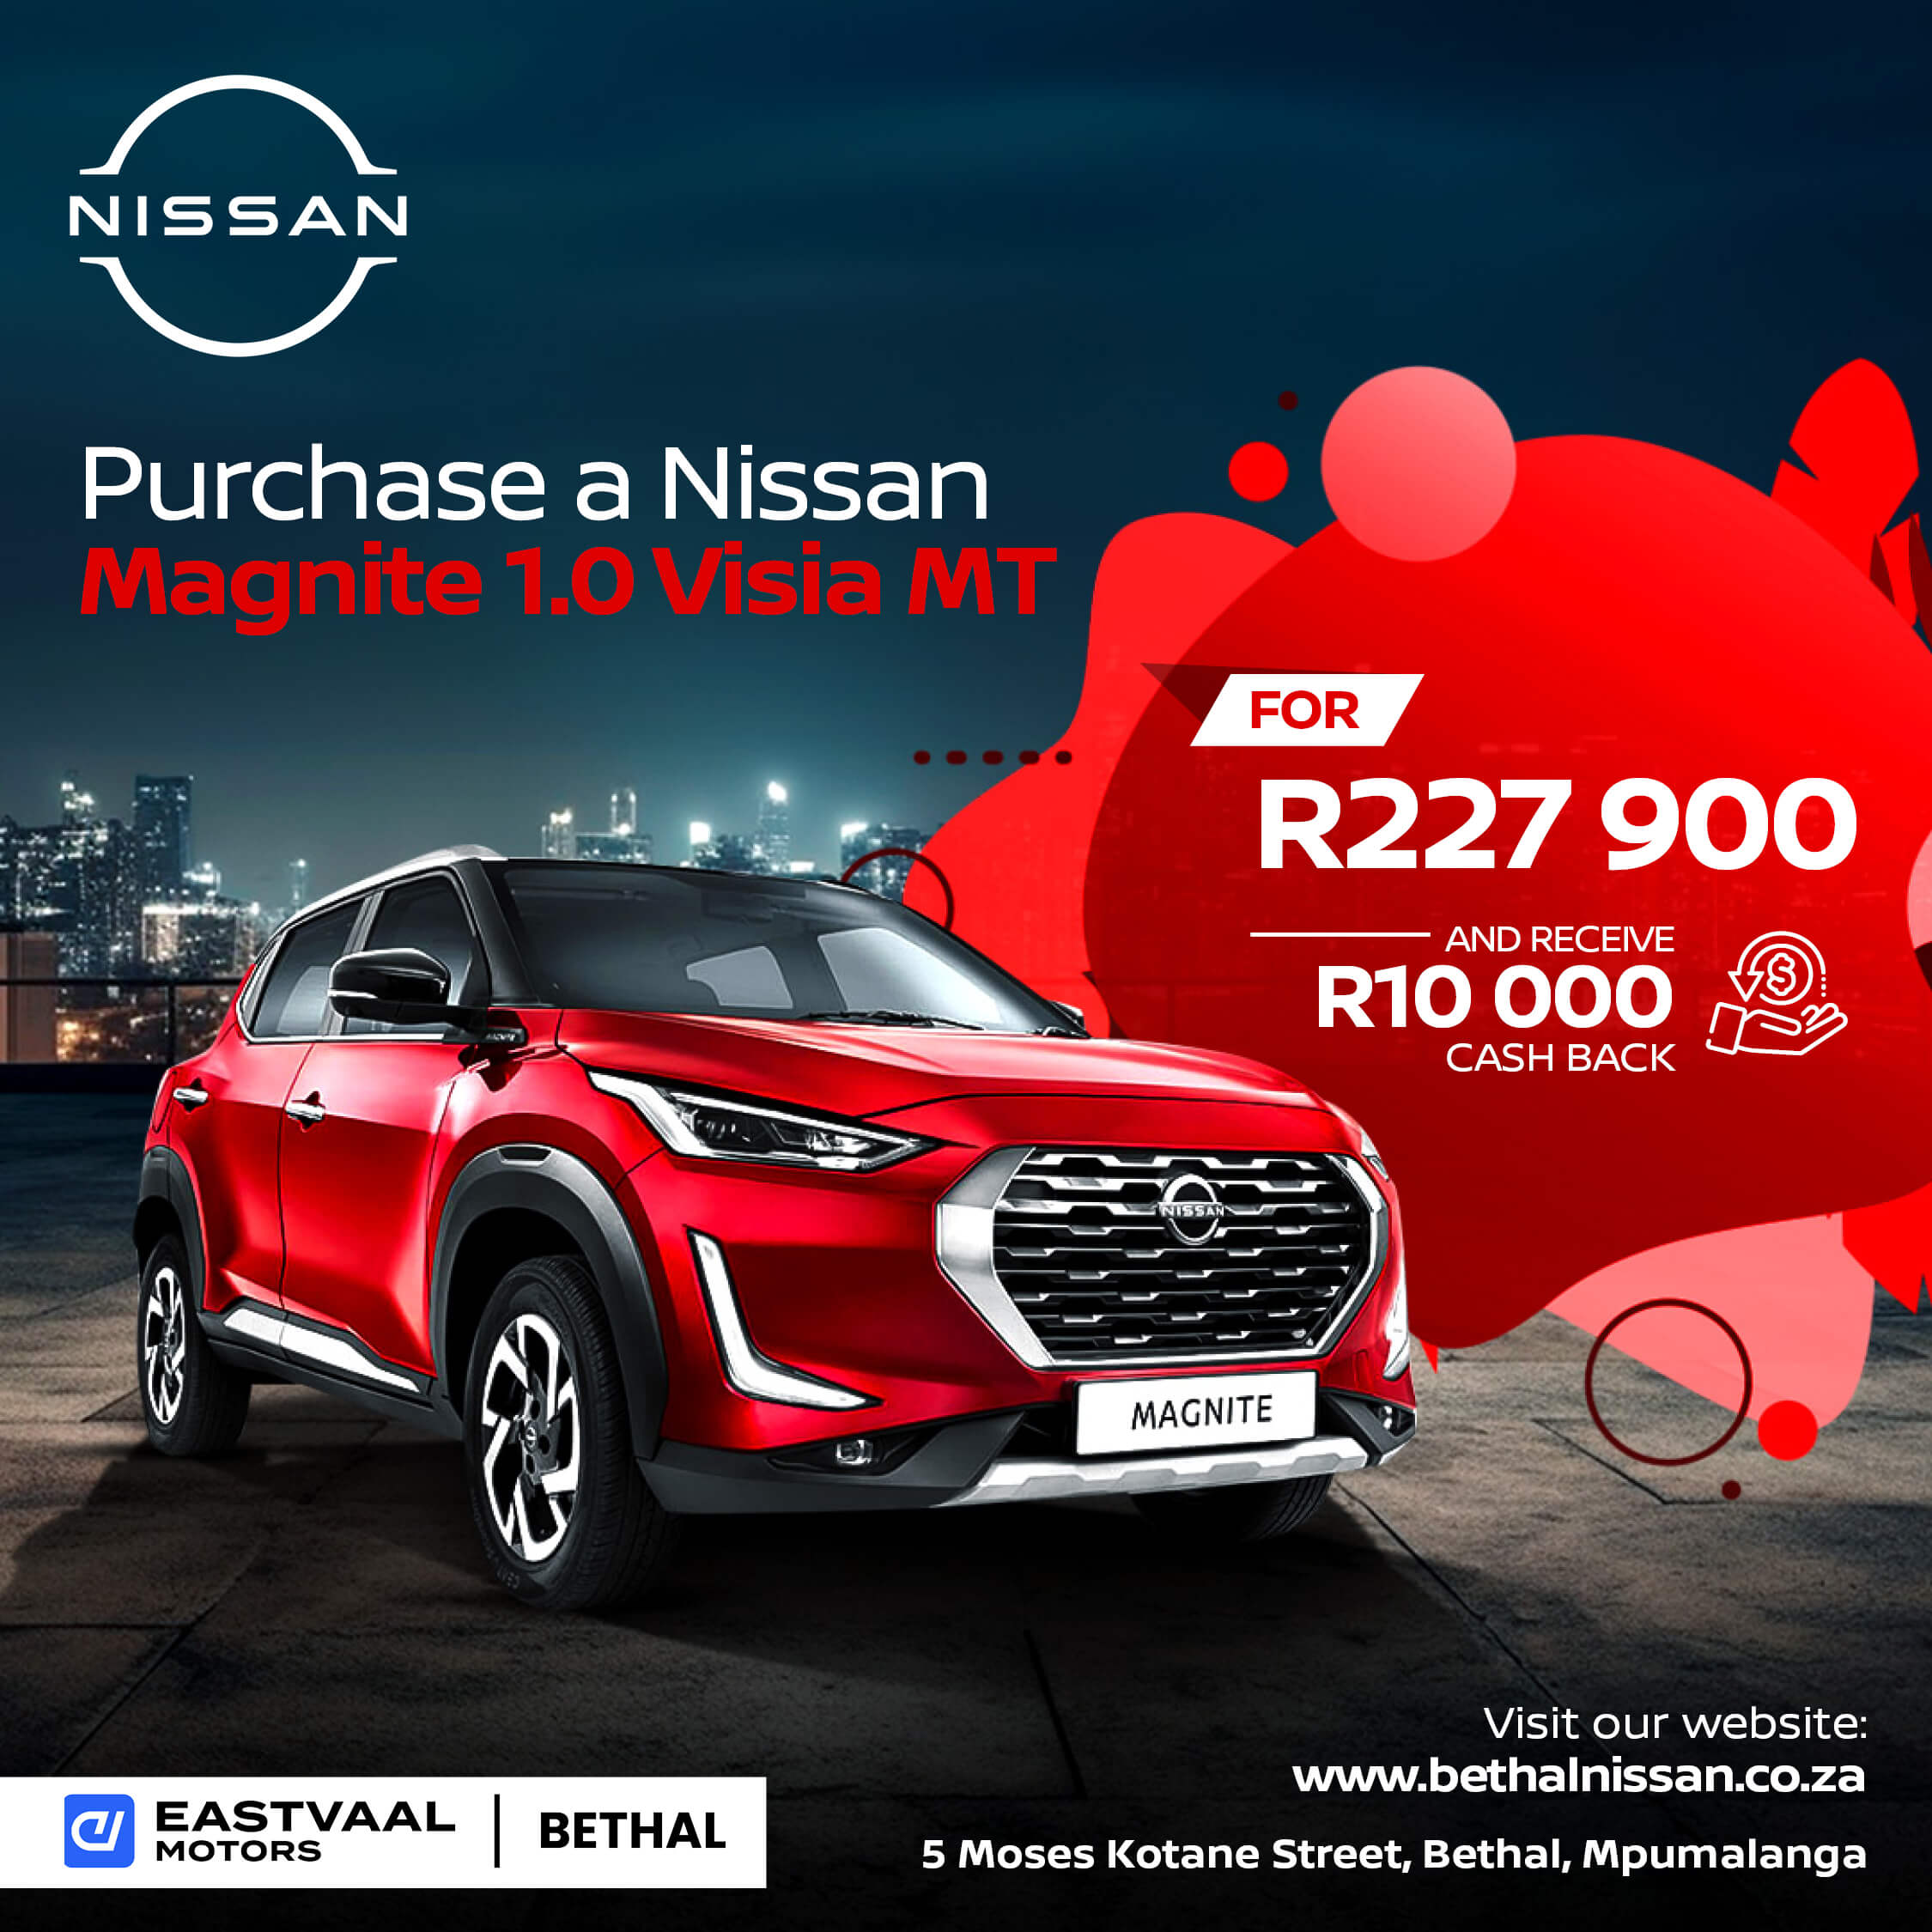 Purchase a Nissan Magnite 1.0 Visia MT image from Eastvaal Motors